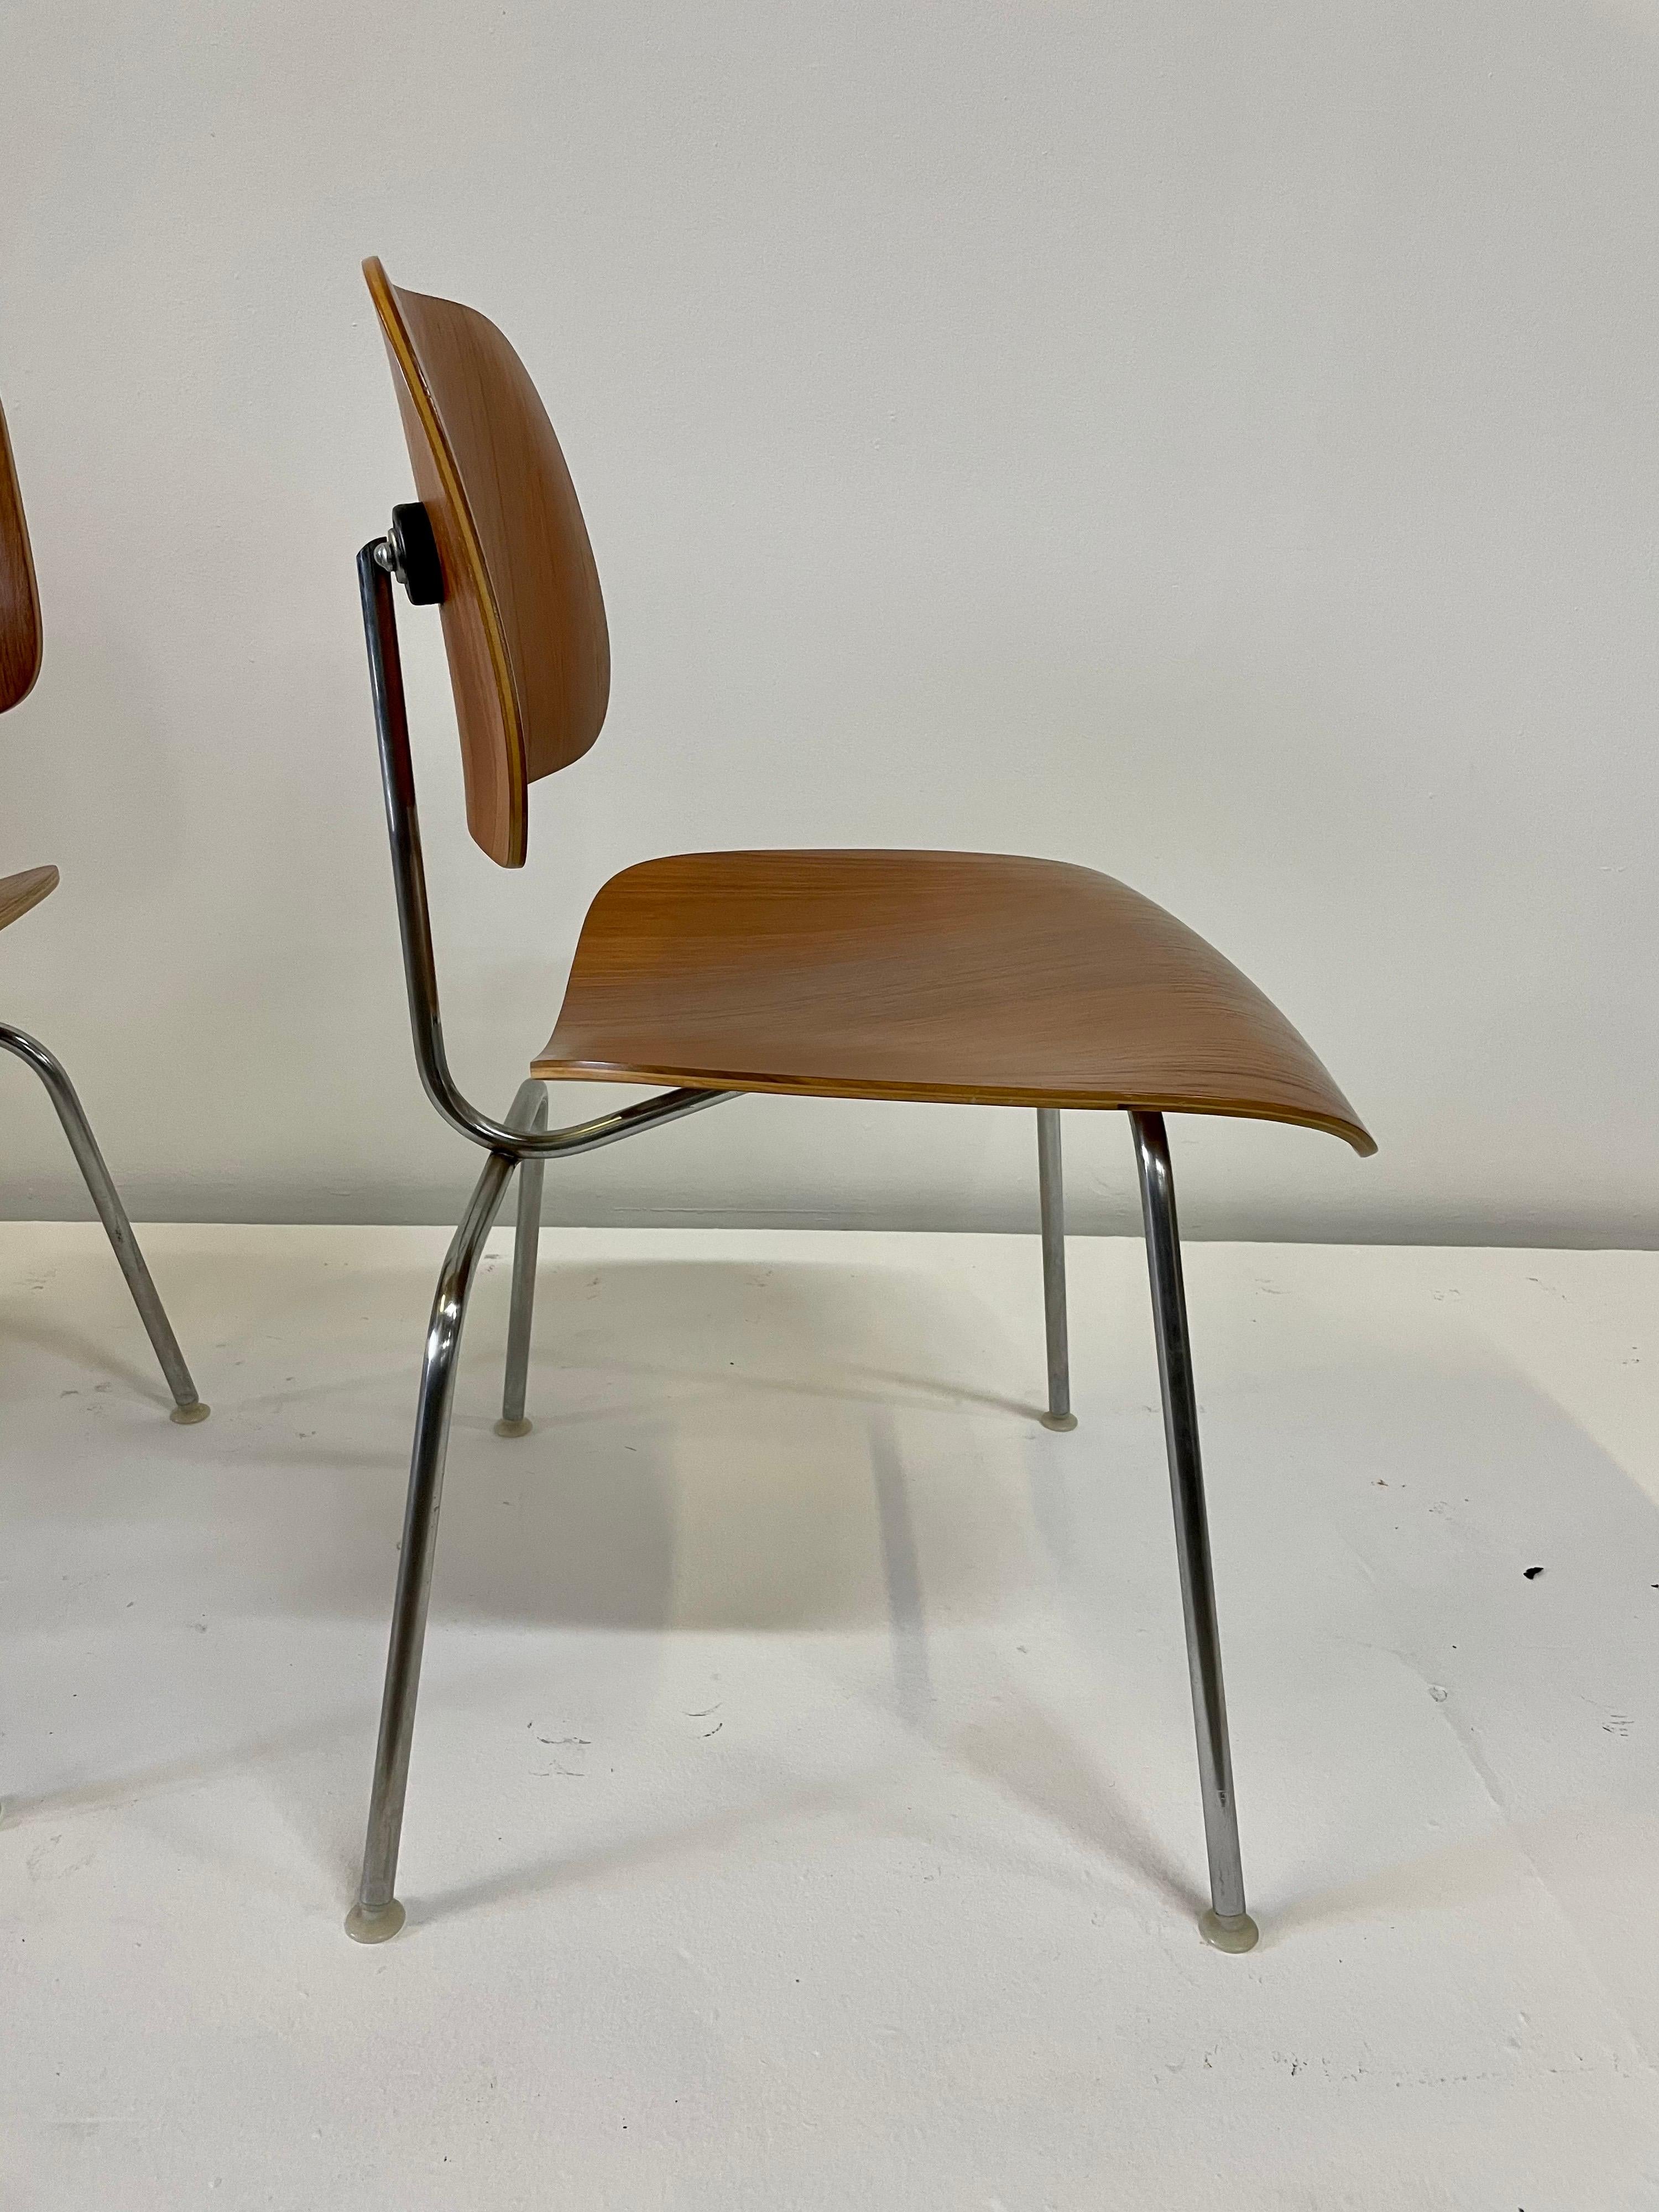 Rare Early Set of Charles and Ray Eames for Herman Miller Chairs in Zebrawood In Good Condition For Sale In East Hampton, NY